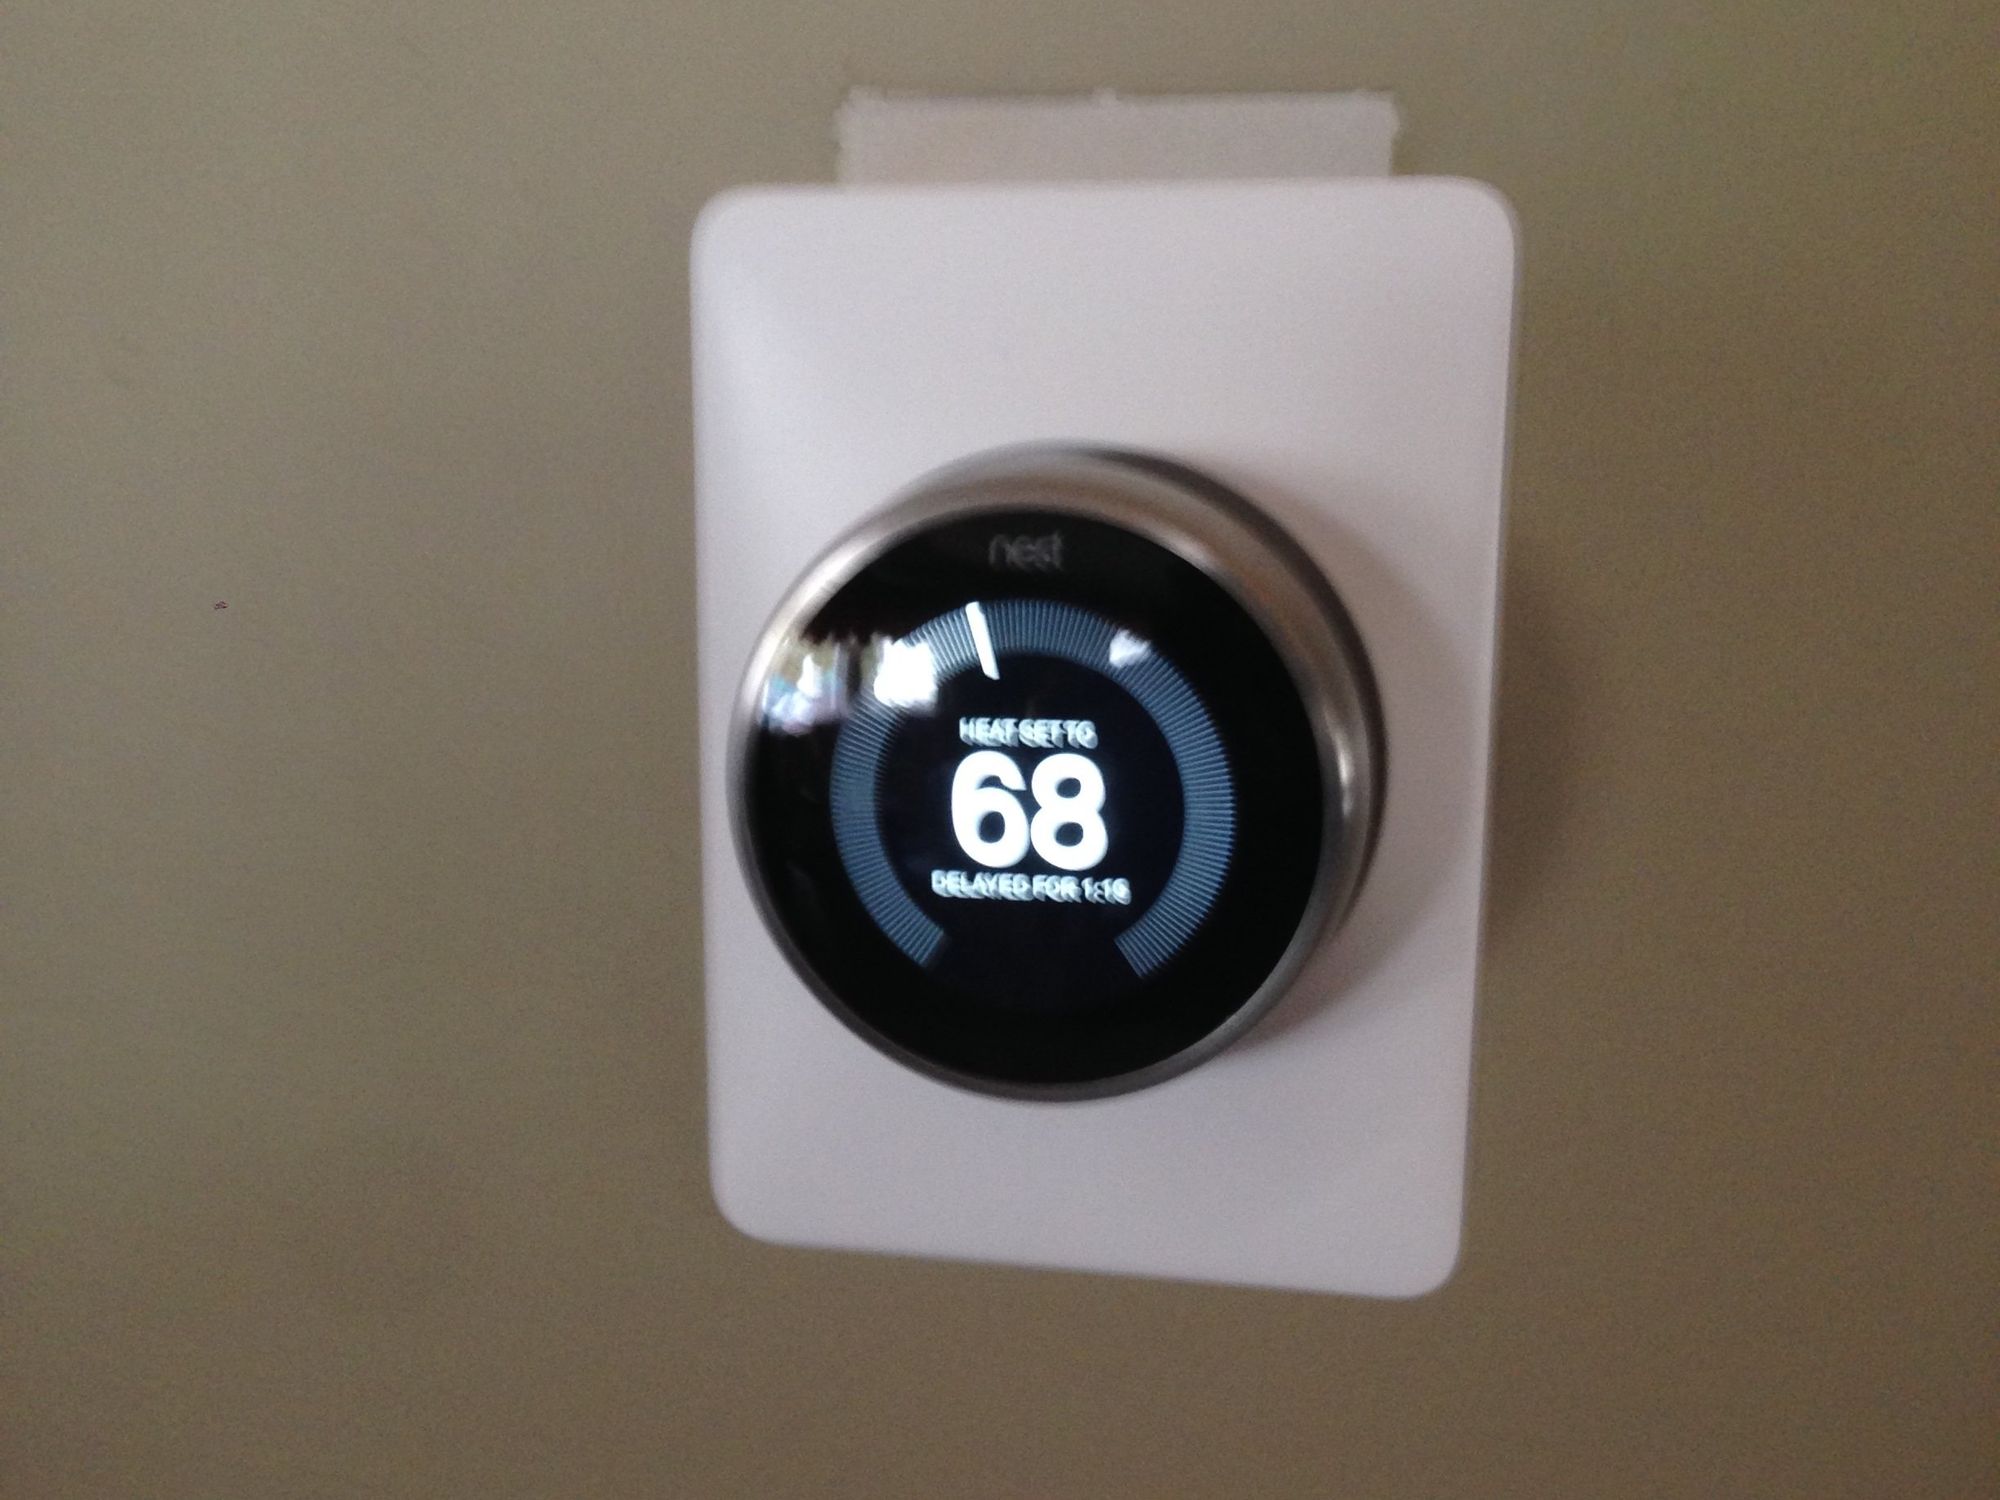 Vivint installed Nest Pro Thermostat on a wall.